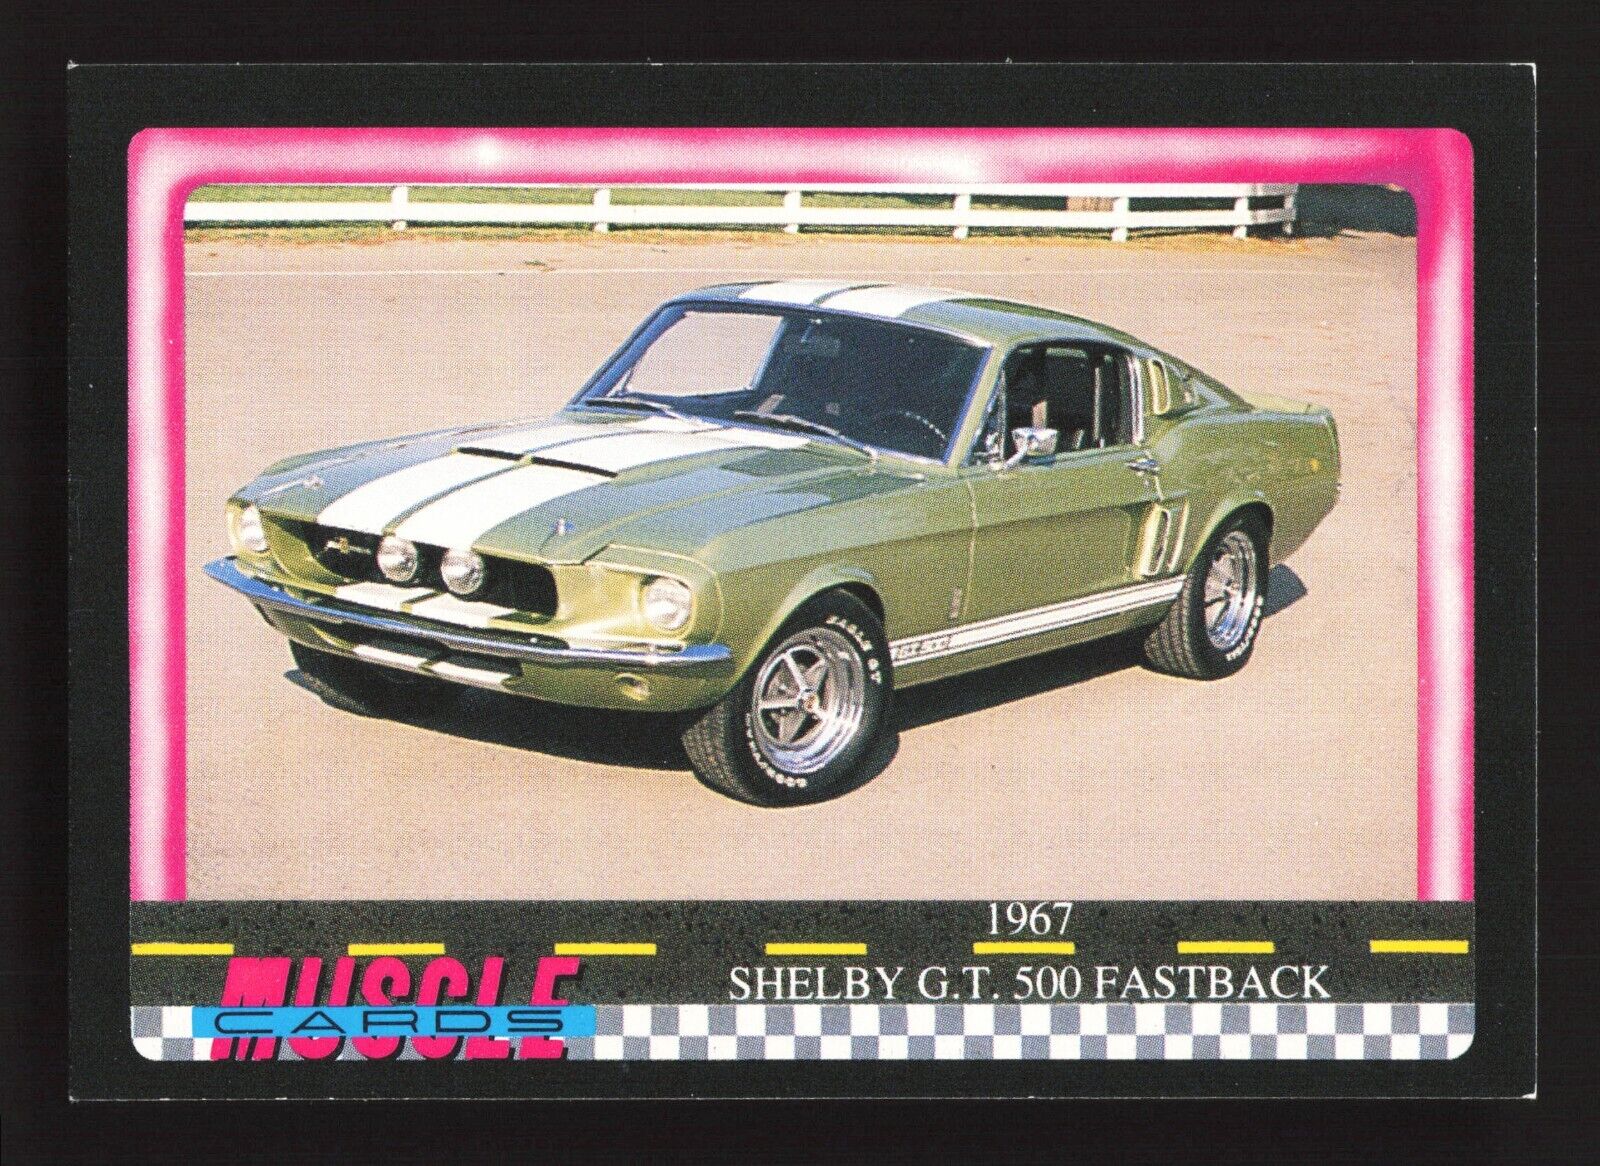 1991 Muscle Cards #24 1967 Shelby G.T. 500 Fastback